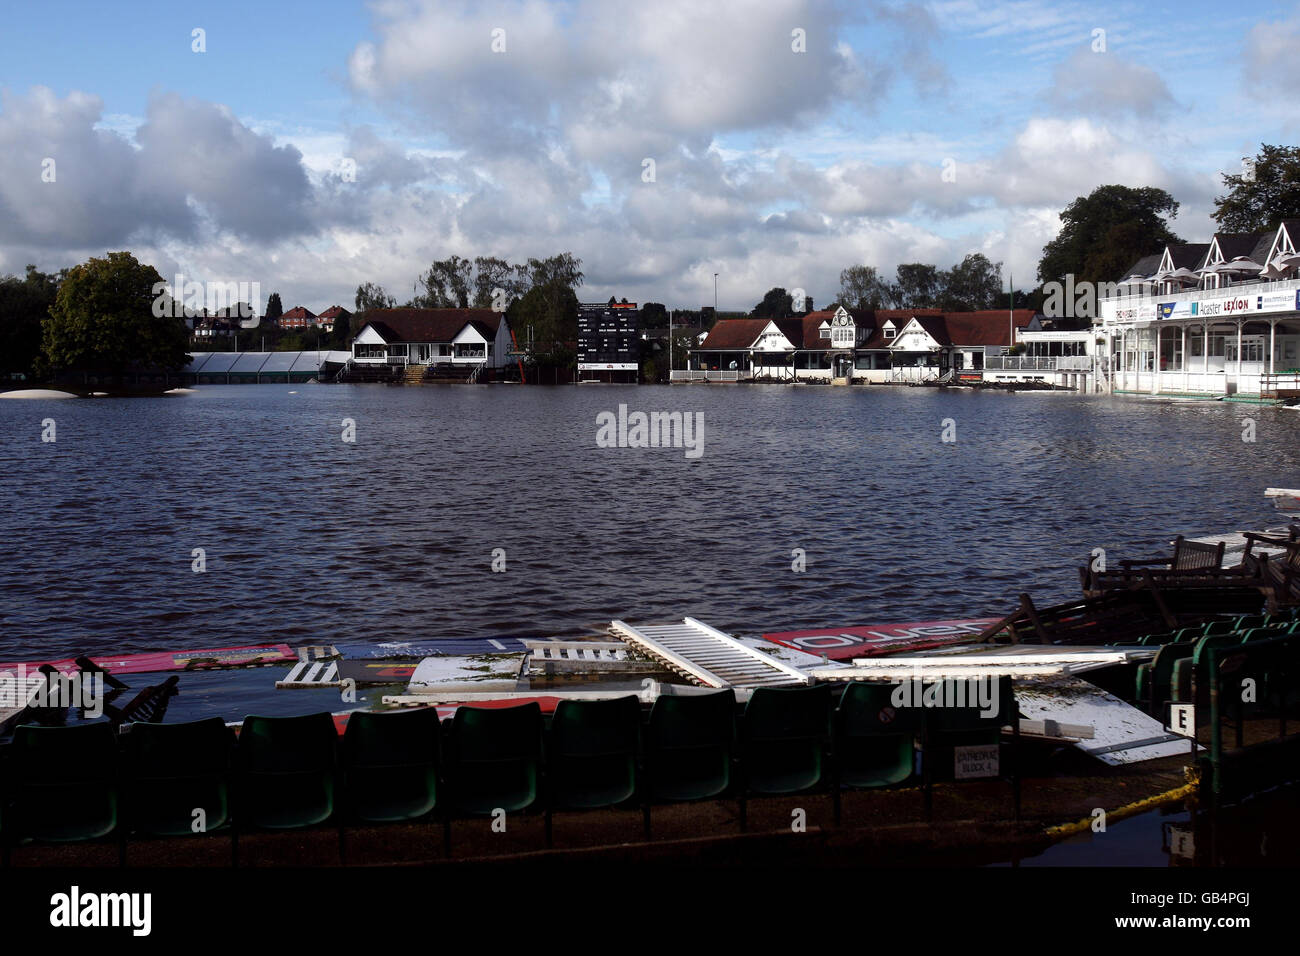 Cricket - Flooding at Worcester CCC - New Road. Worcestershire's New Road ground lies under flood water, causing the end of the Country's season at New Road for the second year in a row. Stock Photo